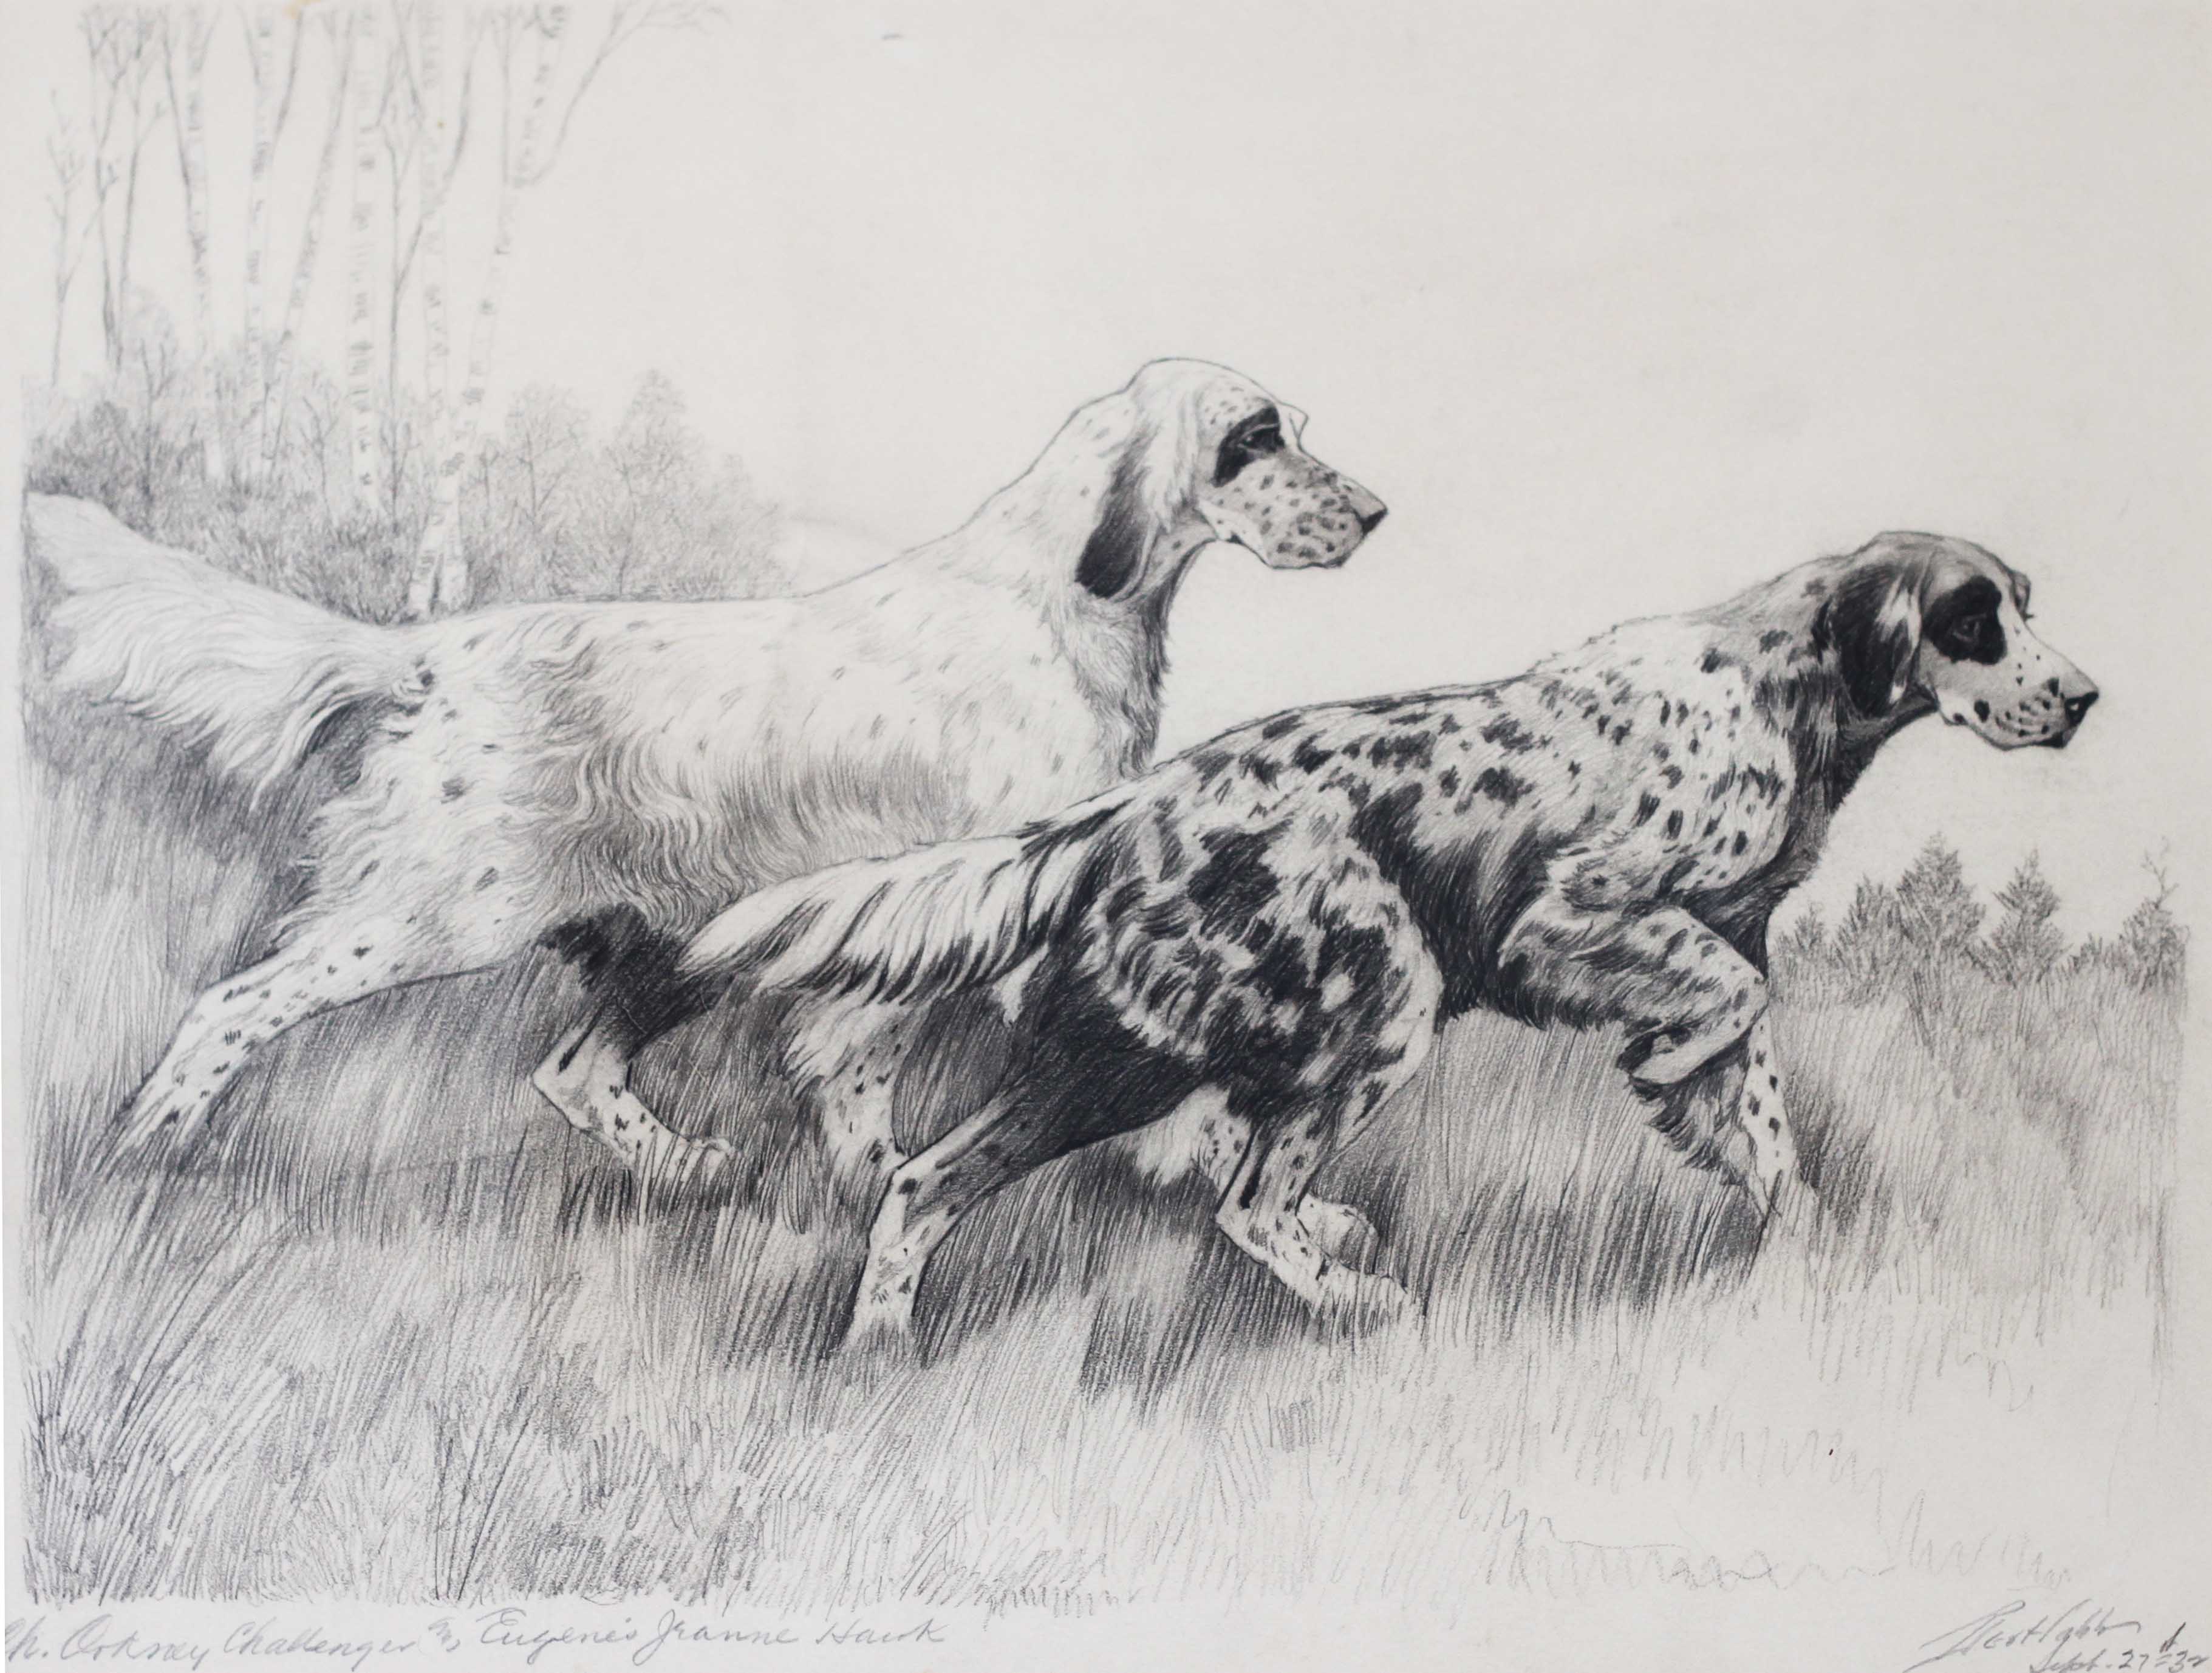 Click to see full size: English Setters, pencil drawing by the highly respected American canine artist Bert Cobb (1869- 1935)- English Setters, pencil drawing by the highly respected American canine artist Bert Cobb (1869- 1935)